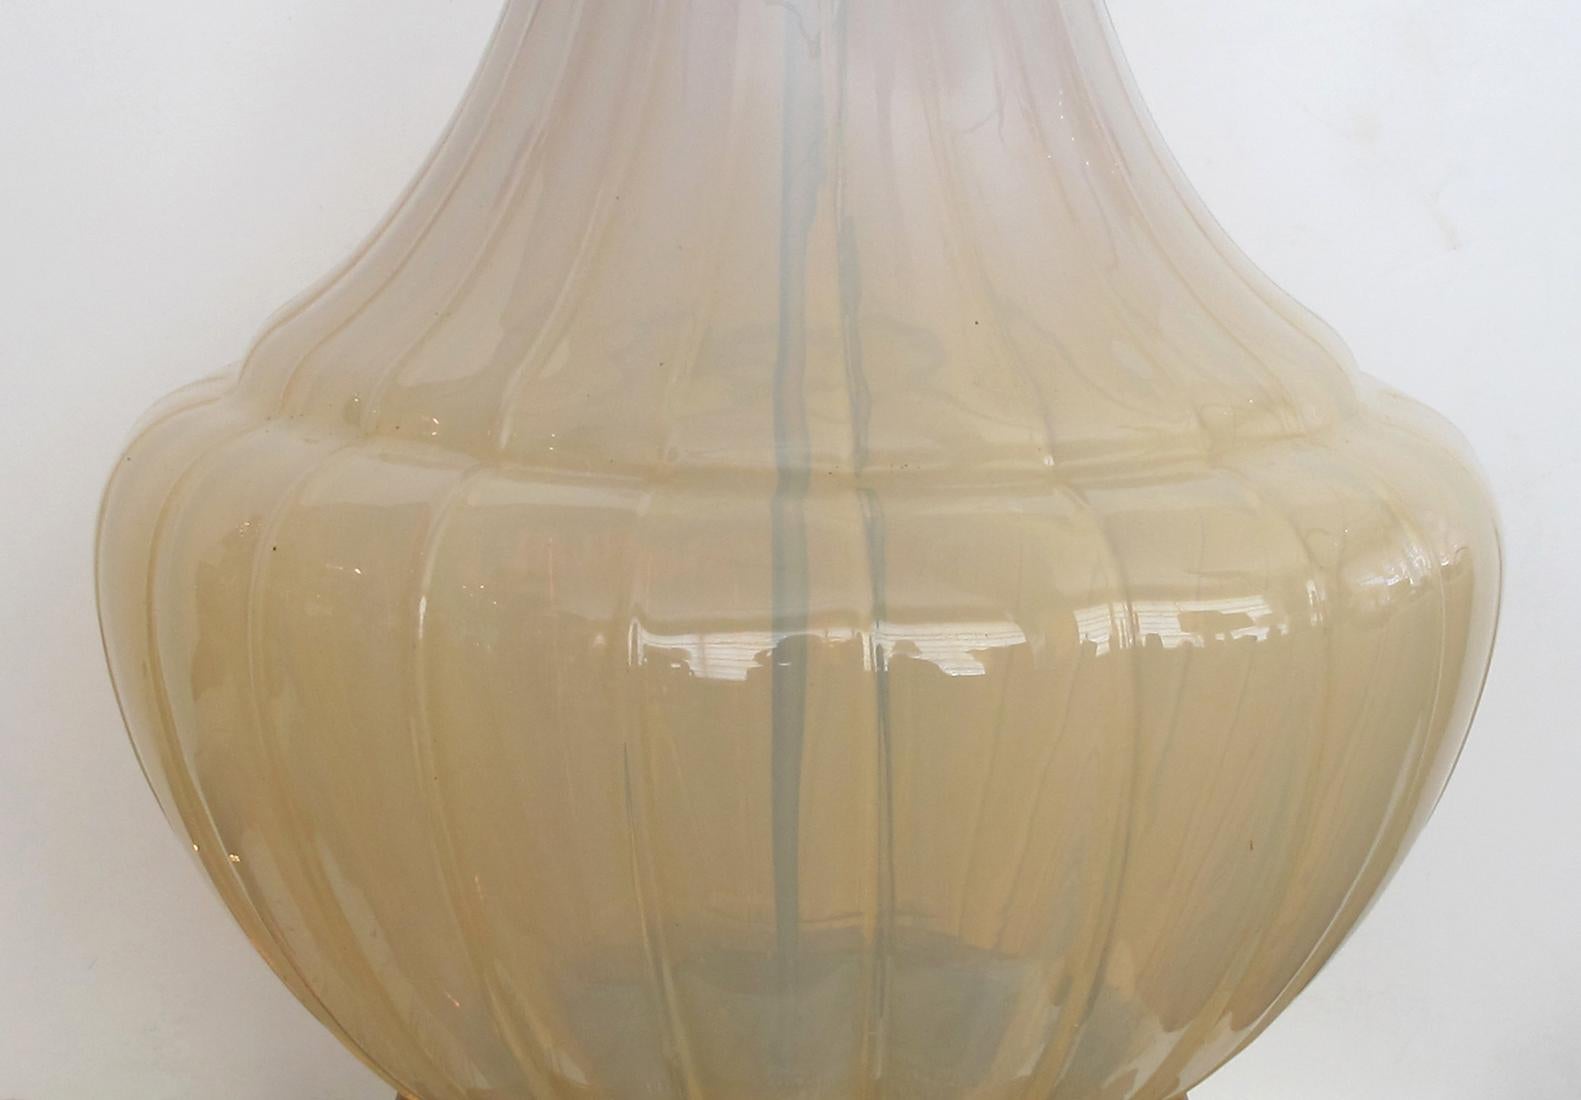 North American Large-Scaled Murano Midcentury Butter-Cream Opaque Glass Lamp